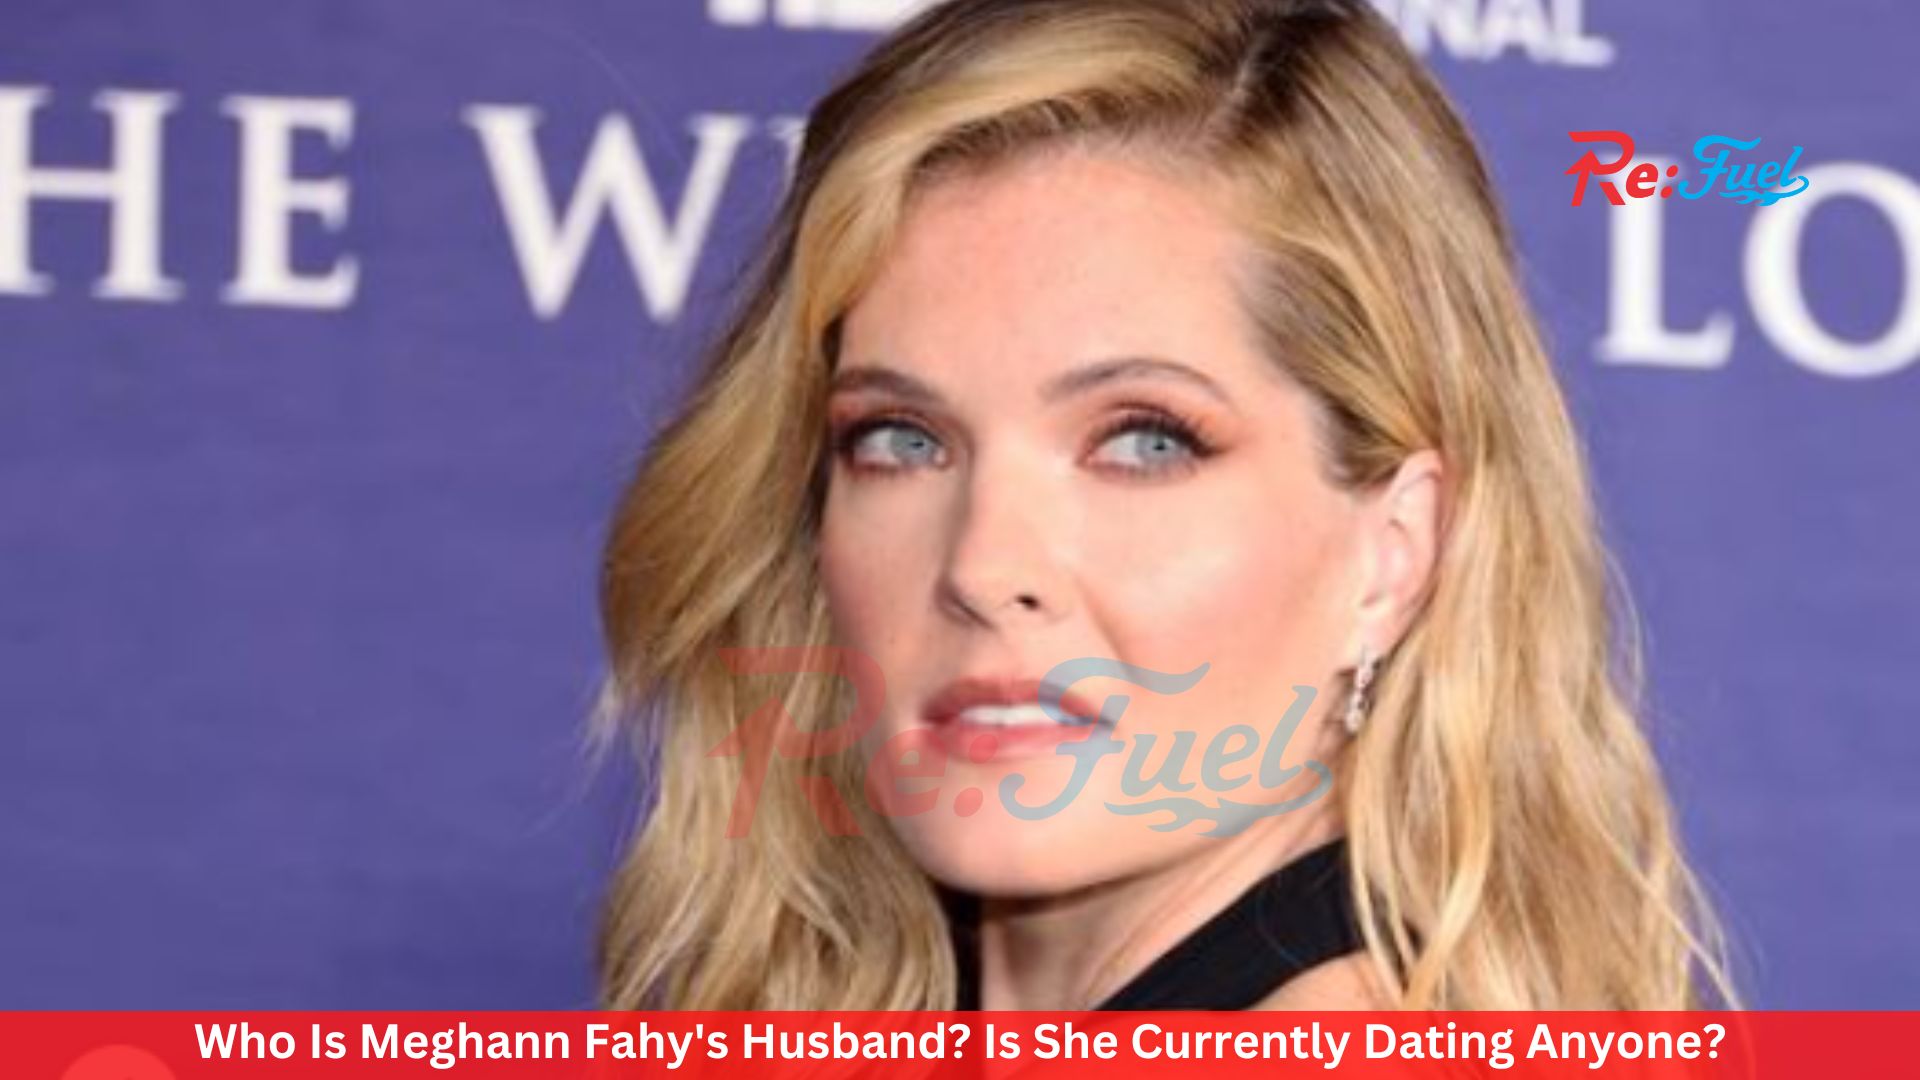 Who Is Meghann Fahy's Husband? Is She Currently Dating Anyone?